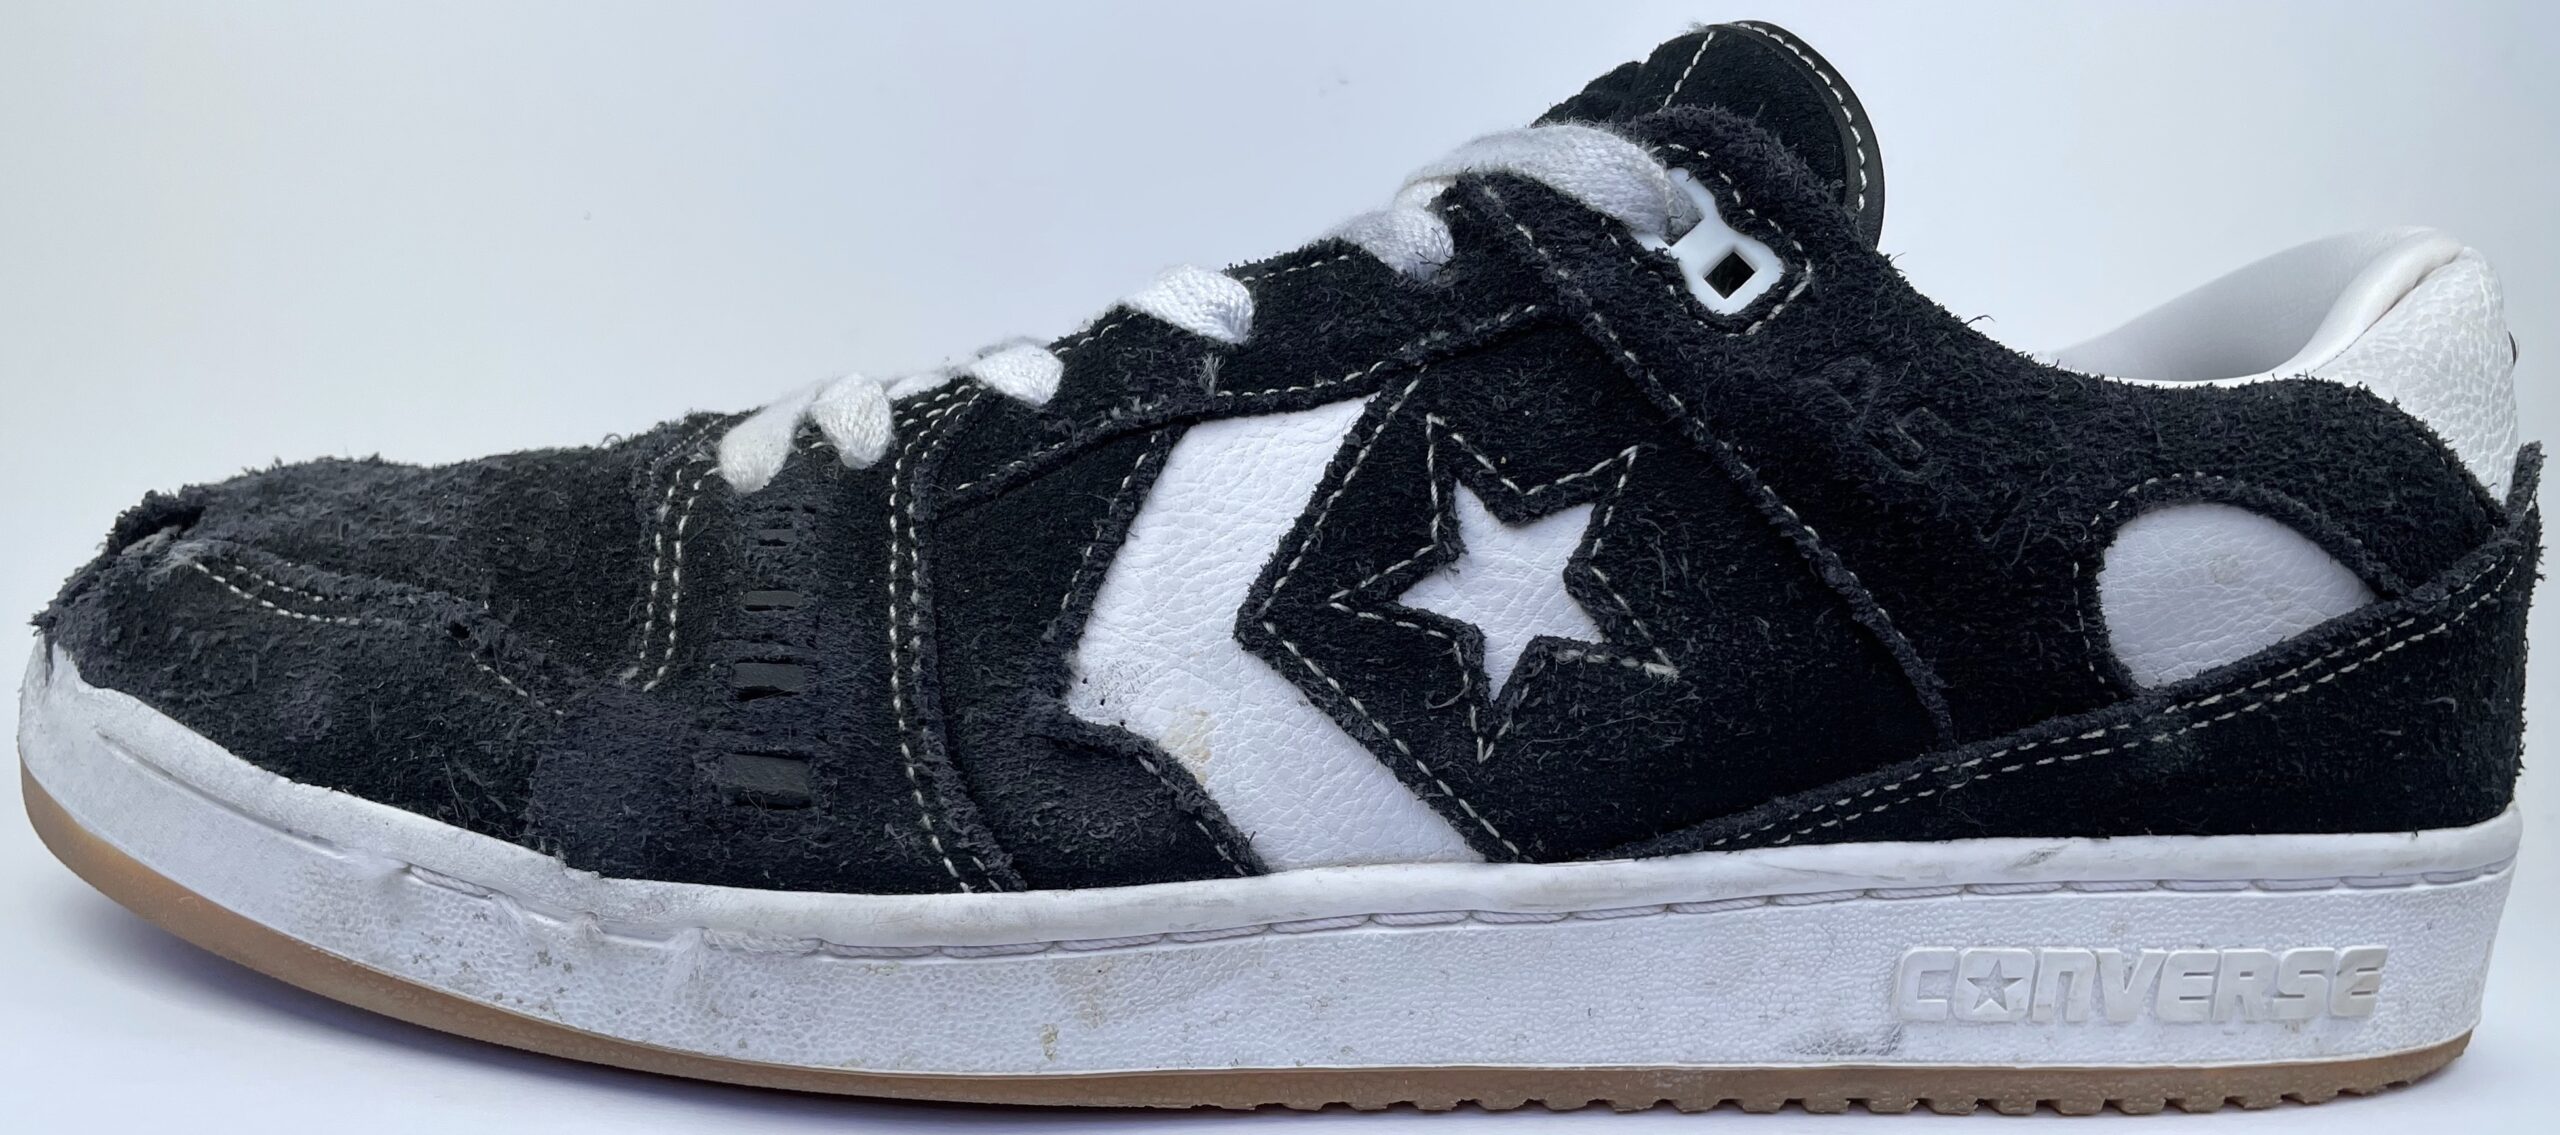 Converse AS-1 Pro - Weartested - detailed skate shoe reviews